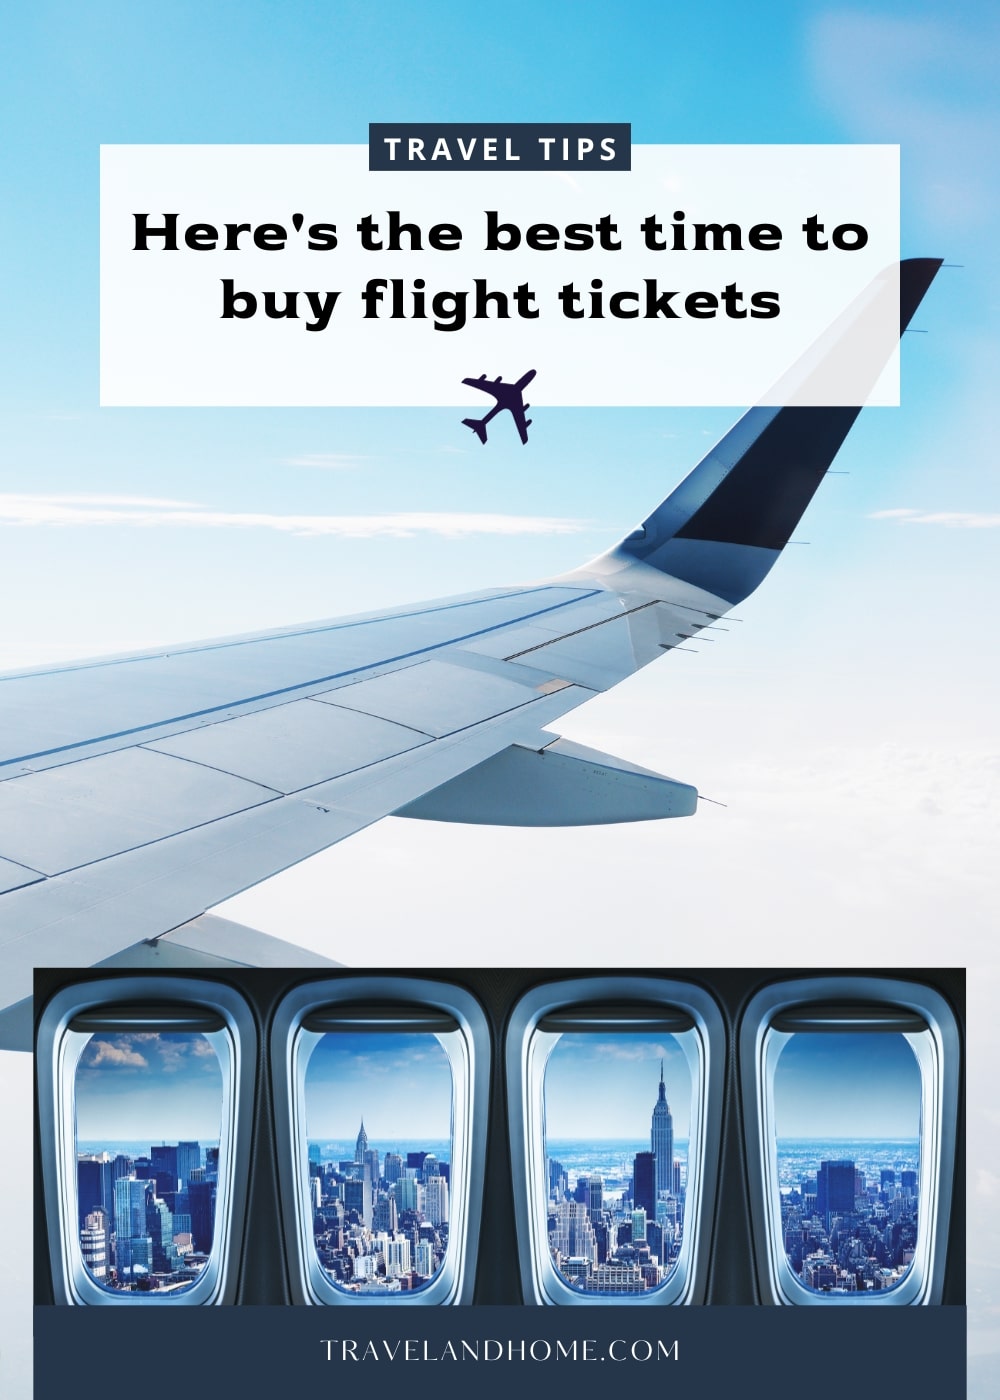 How To Get Cheaper Flight Tickets, best time to buy flight tickets, #travelandhome min